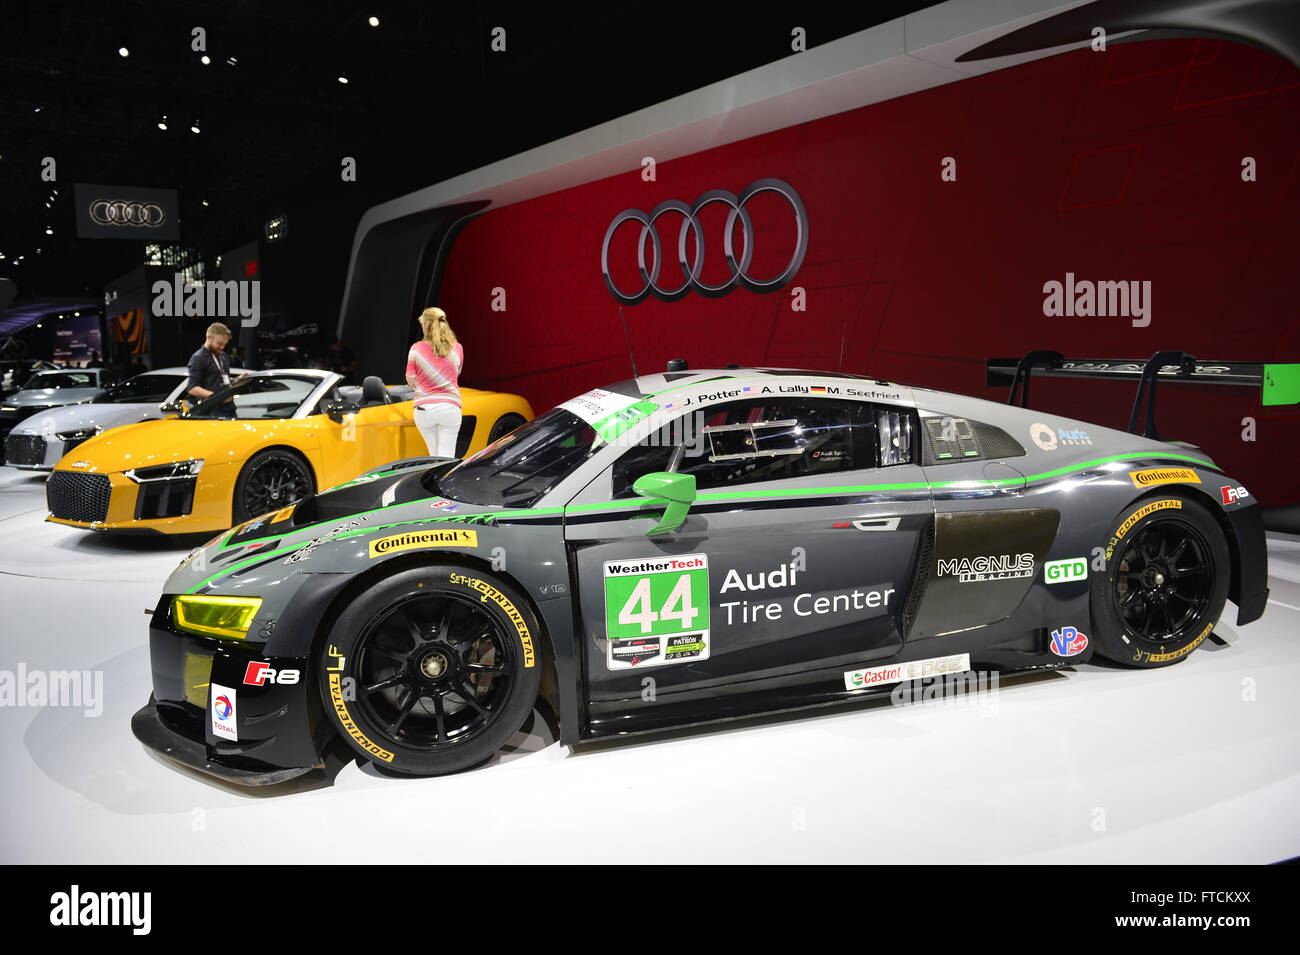 March 23, 2016 - Manhattan, New York, United States - A silver Audi R8 LMS V10 endurance racer, and yellow Audi R8 Spyder V10 making its world premiere , are shown at the New York International Auto Show 2016, at the Jacob Javits Center. This was Press Preview Day one of NYIAS, and the Trade Show will be open to the public for ten days, March 25th through April 3rd. (Credit Image: © Ann Parry via ZUMA Wire) Stock Photo